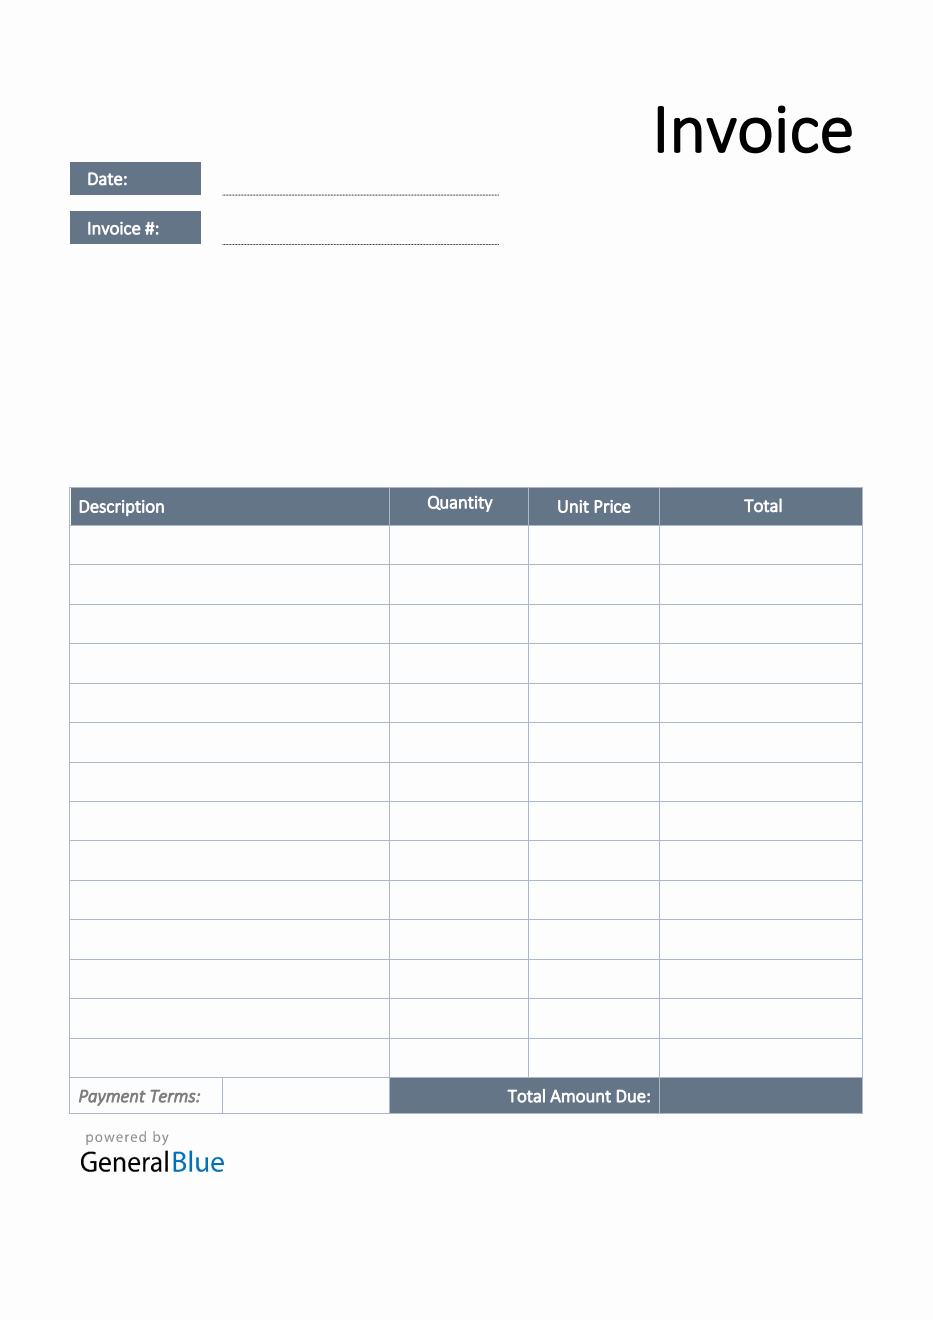 Invoice Template for U.K. in PDF (Simple) Inside Business Invoice Template Uk